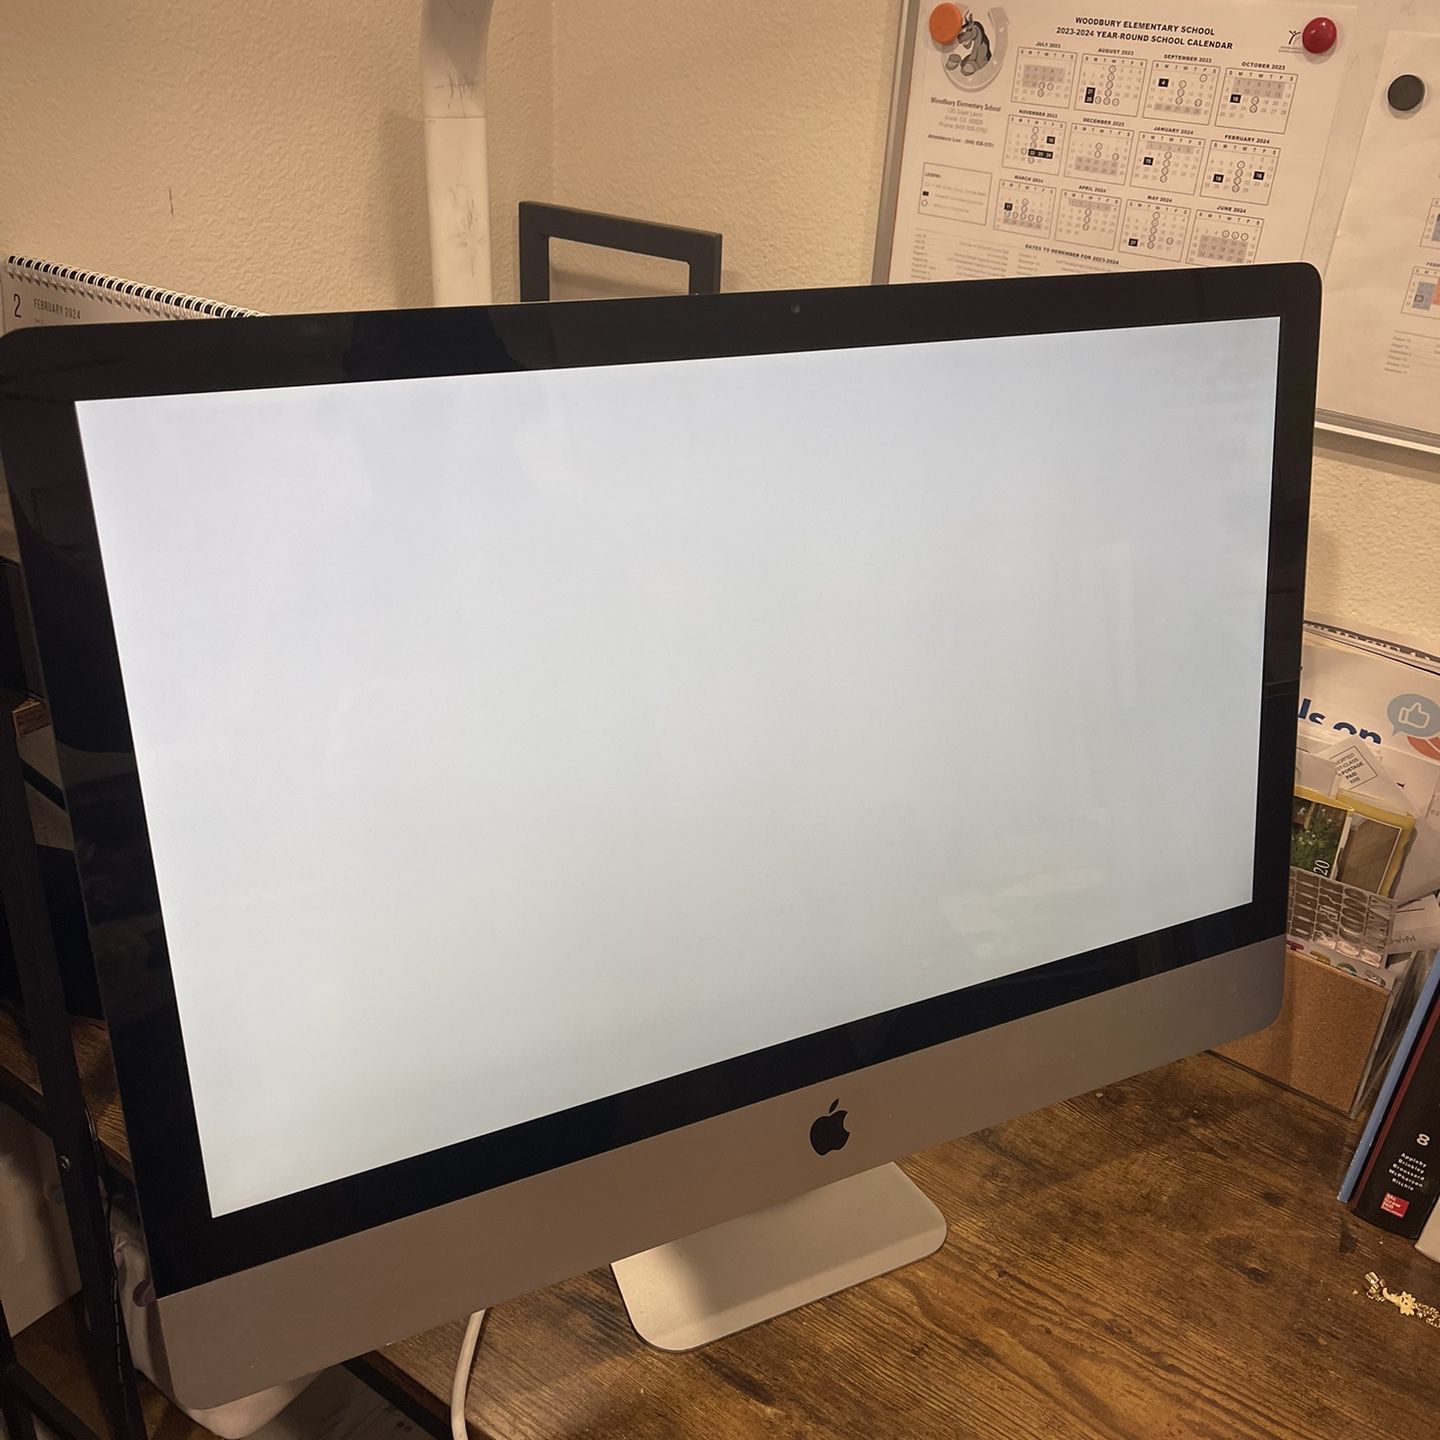 2011 iMac 27-inch Used, In Good Condition 